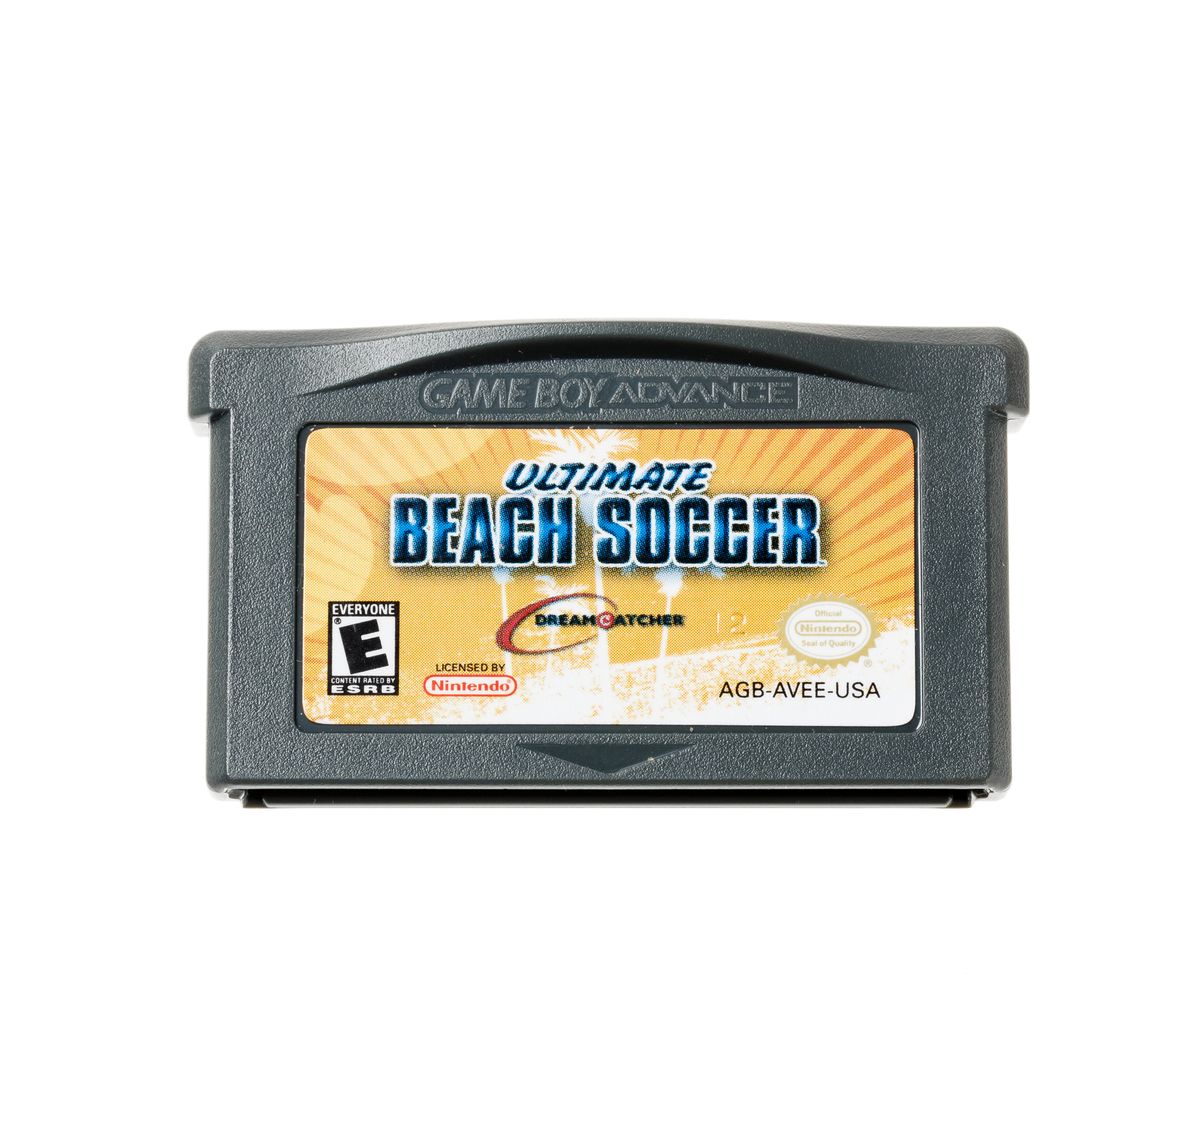 Ultimate Beach Soccer - Gameboy Advance Games